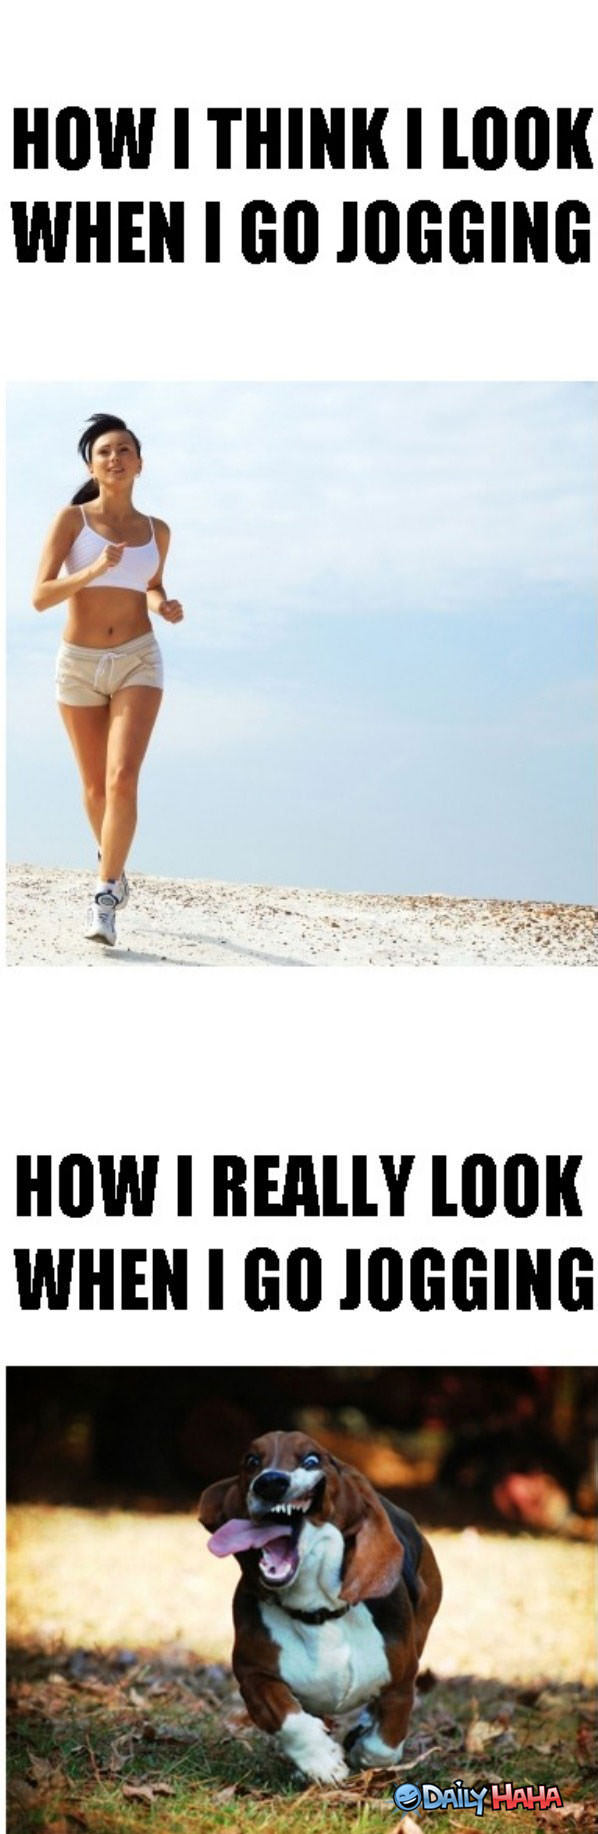 Going Jogging funny picture